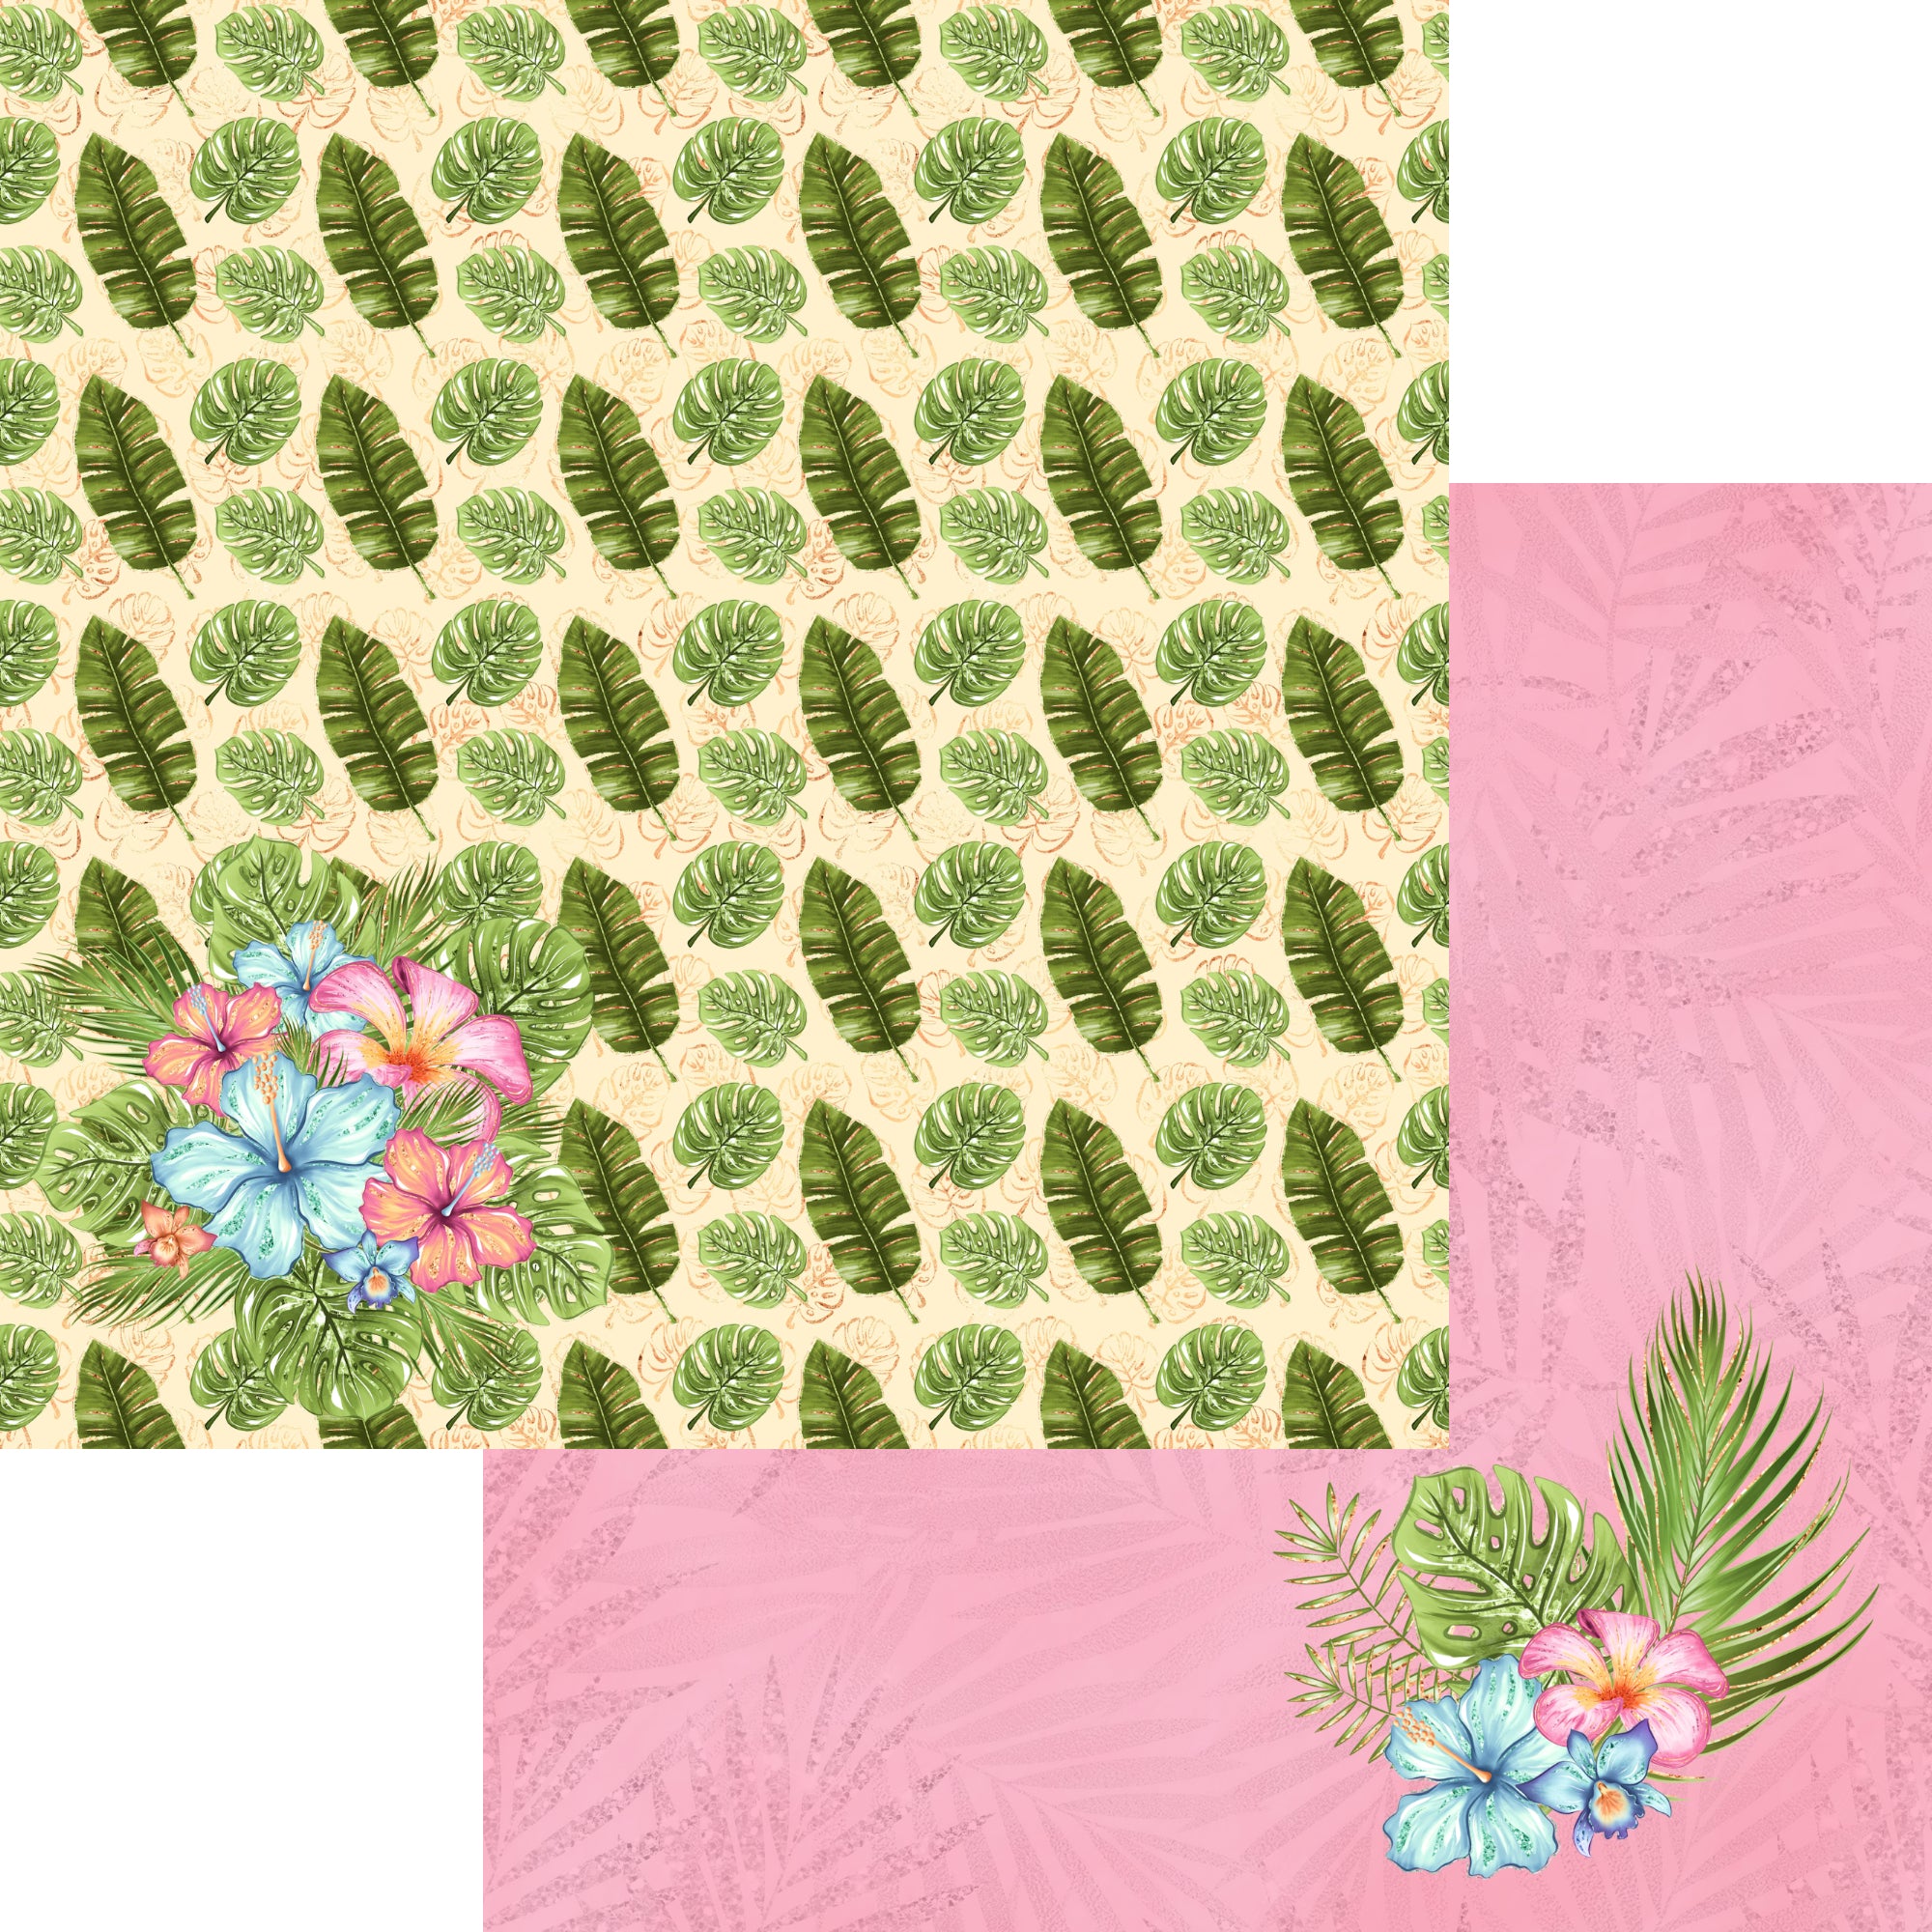 Tropical Bliss 12 x 12 Scrapbook Paper & Embellishment Kit by SSC Designs